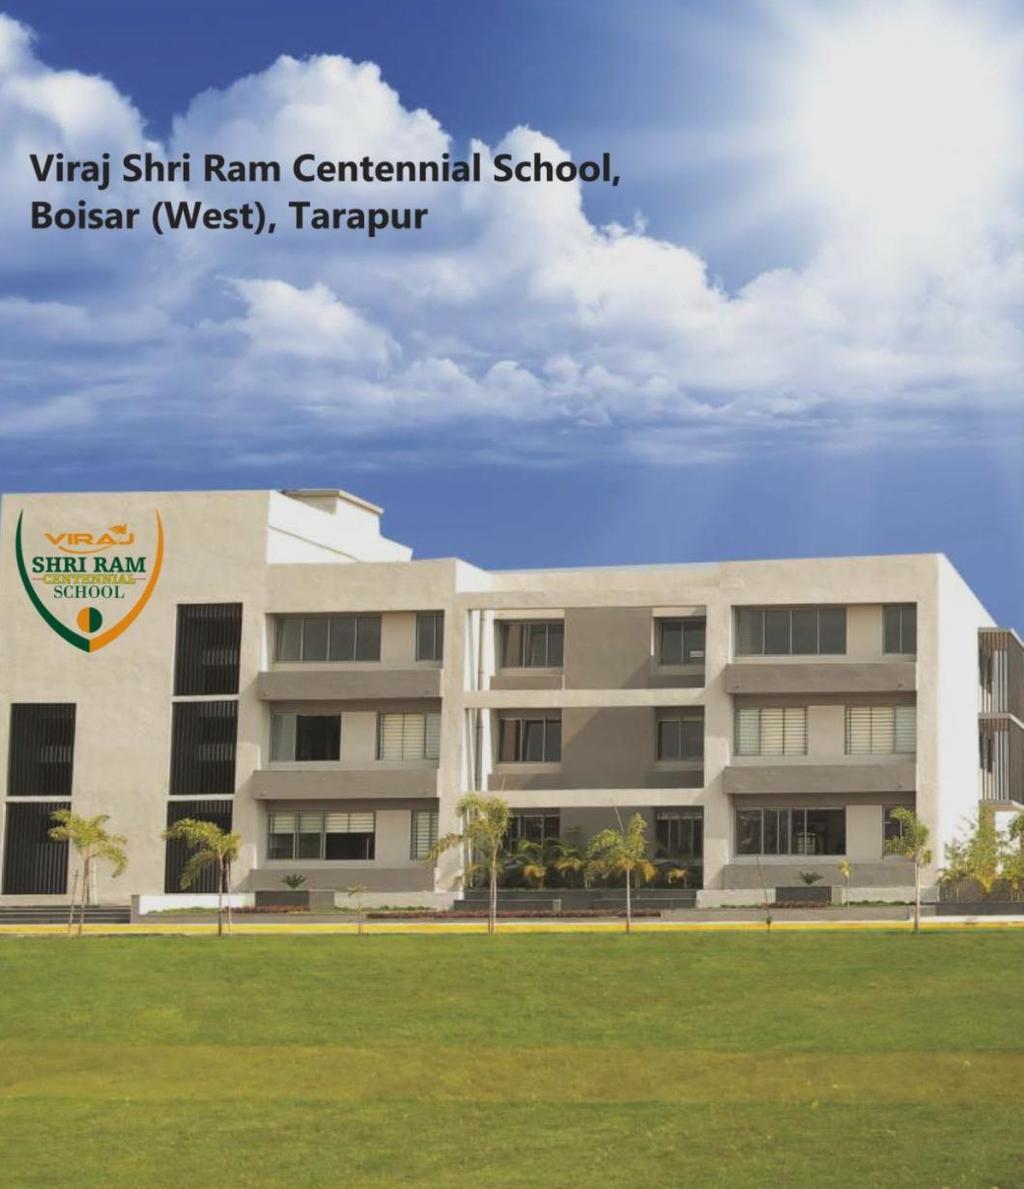 Viraj Shri Ram Centennial School Set up in June 2013 Associated with Shri Ram New Horizons Ltd Free transportation and meal facility for all Range of extra curricular activities like performing arts,